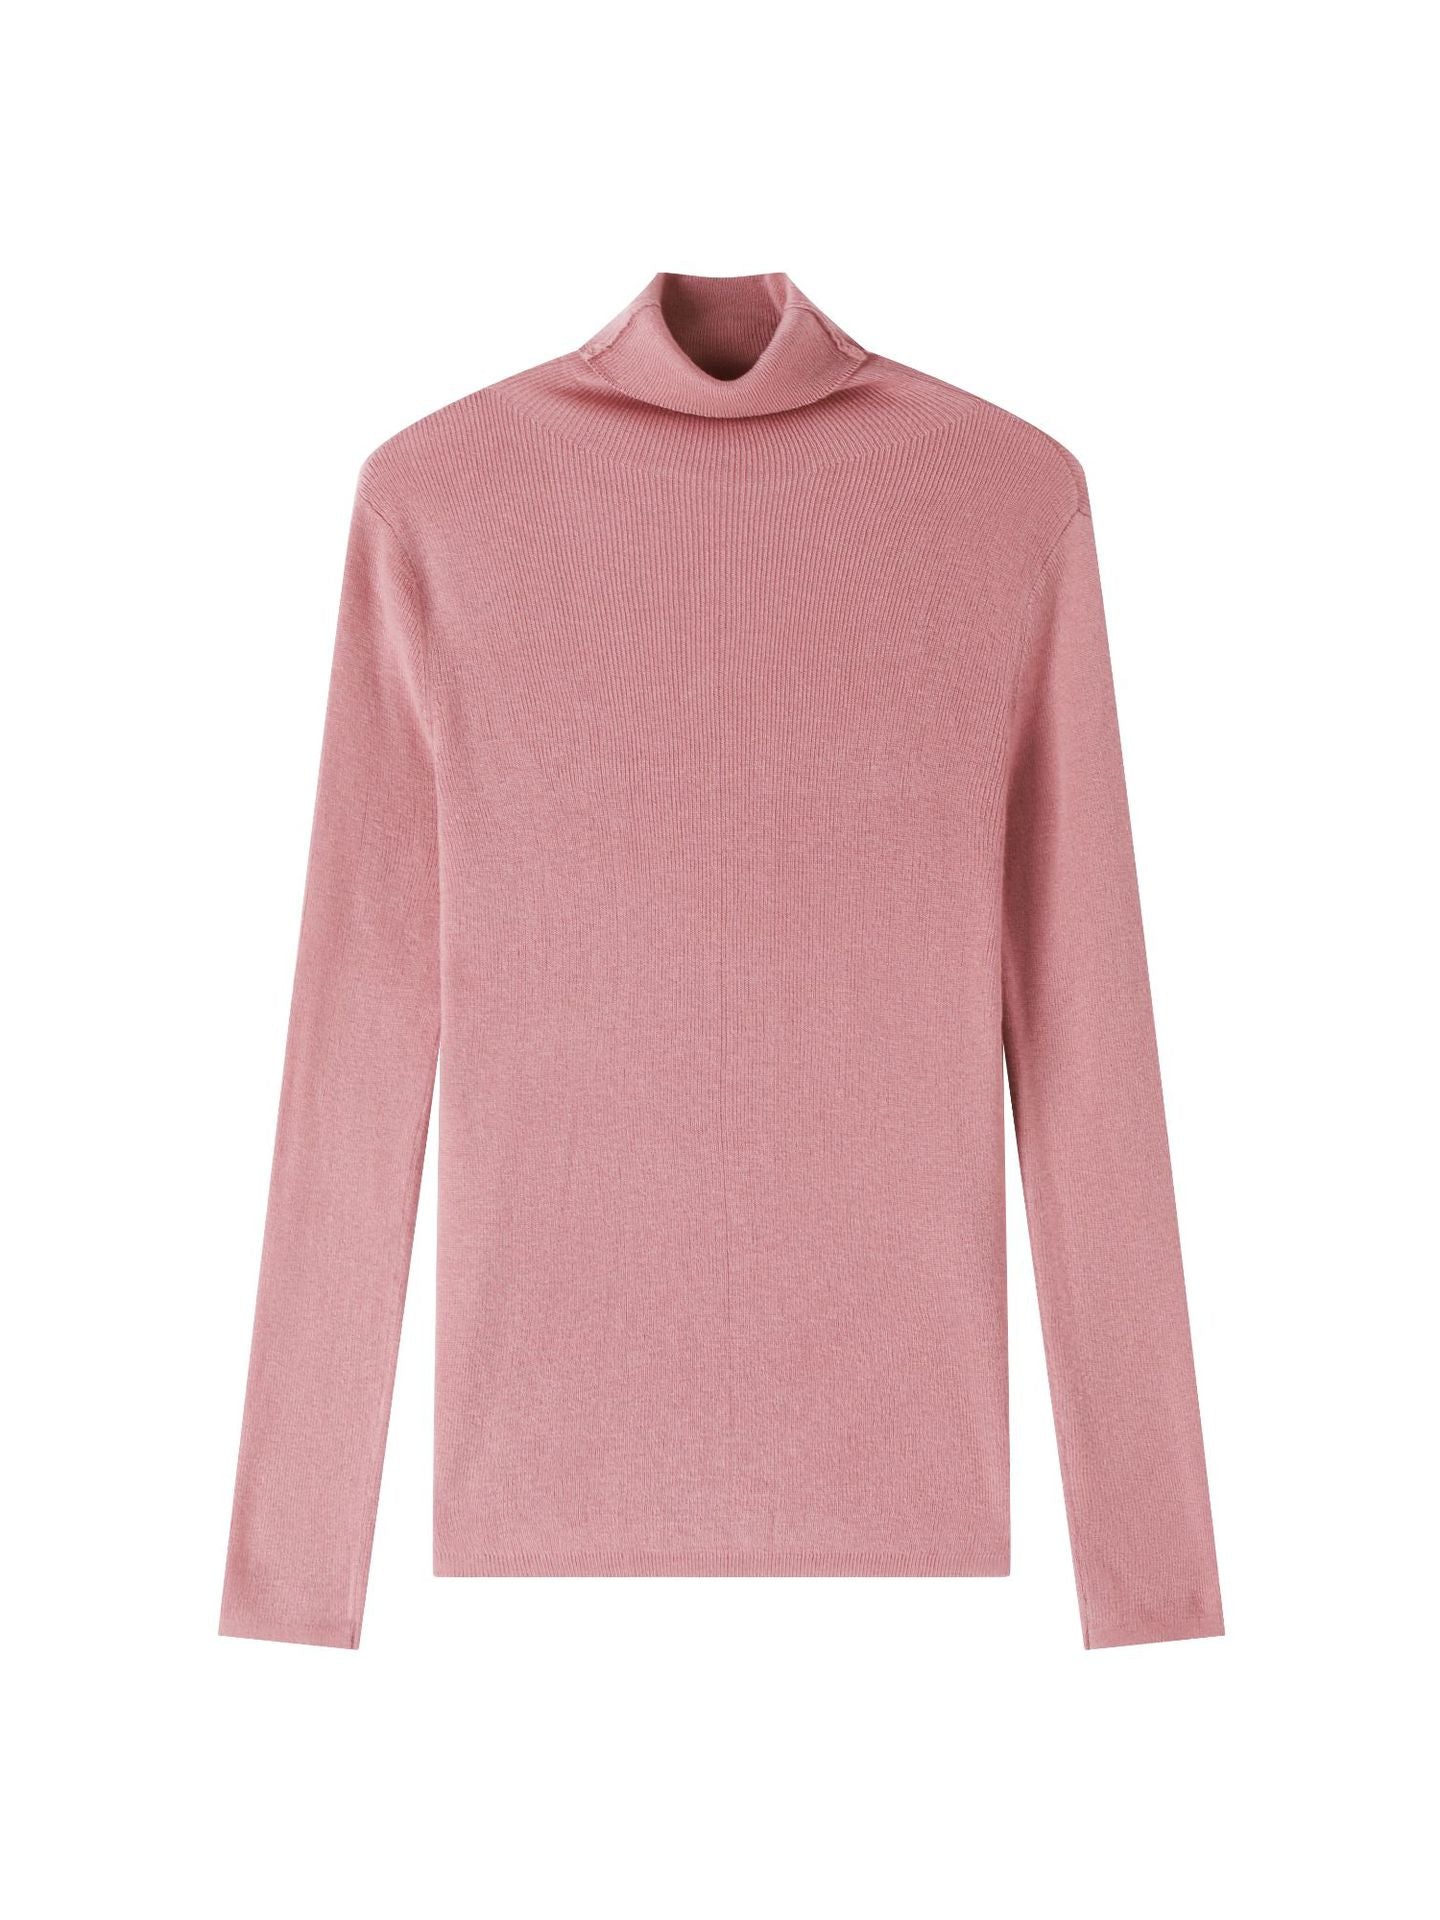 Long Sleeve High-Neck Wool Pullovers